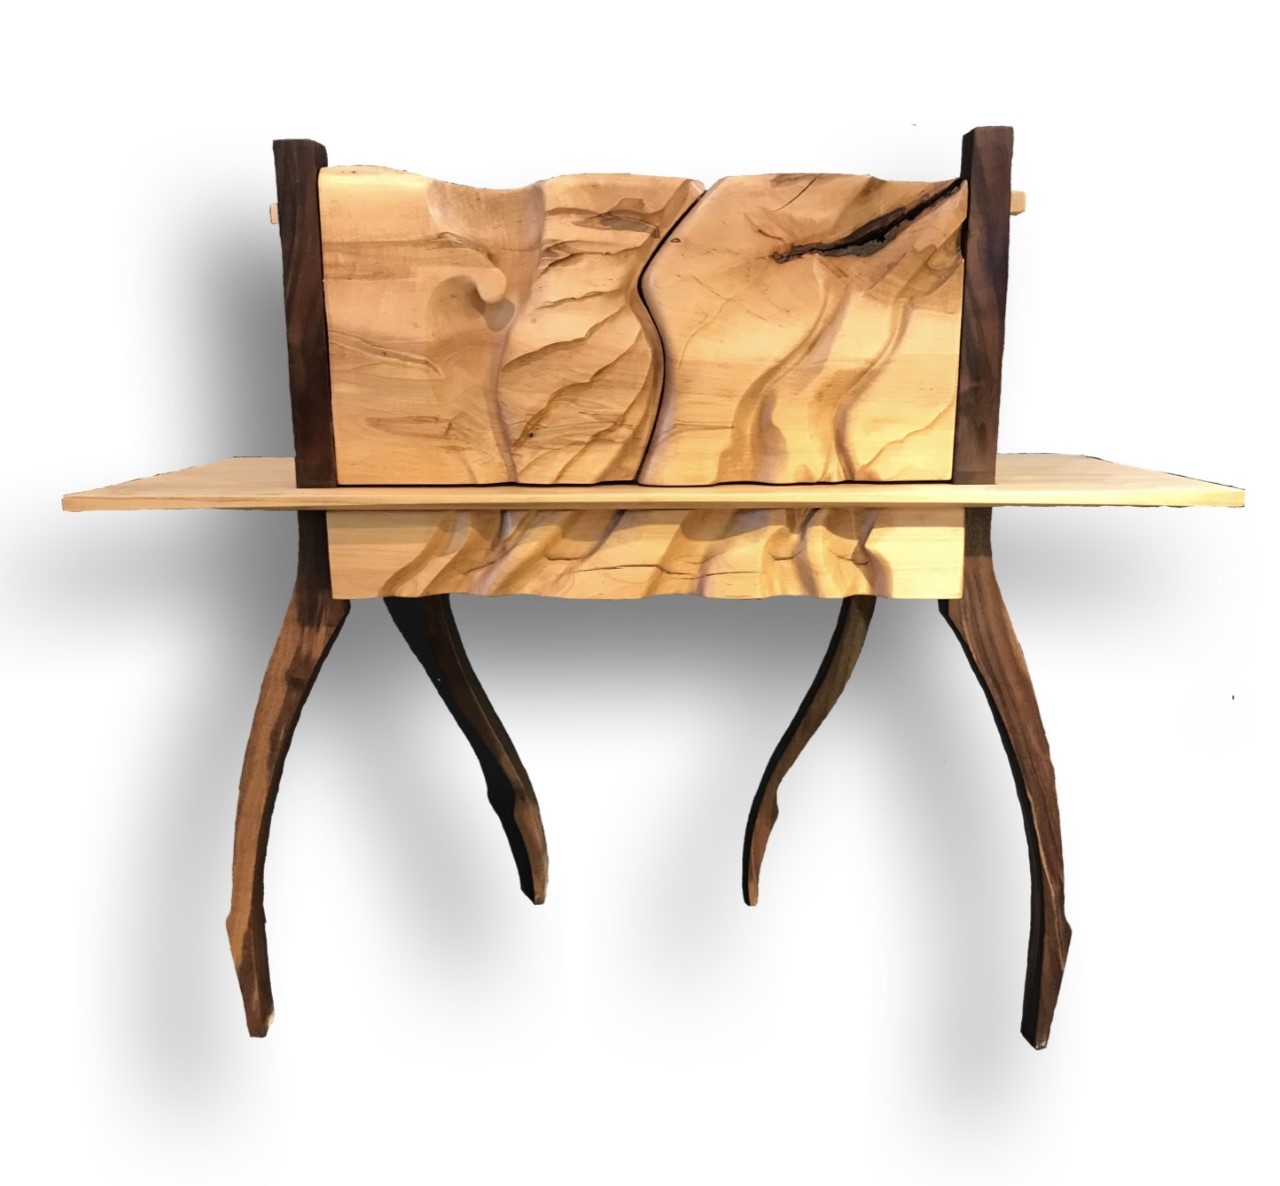 Local Furniture Maker Creates Artful Pieces for the Modern Home